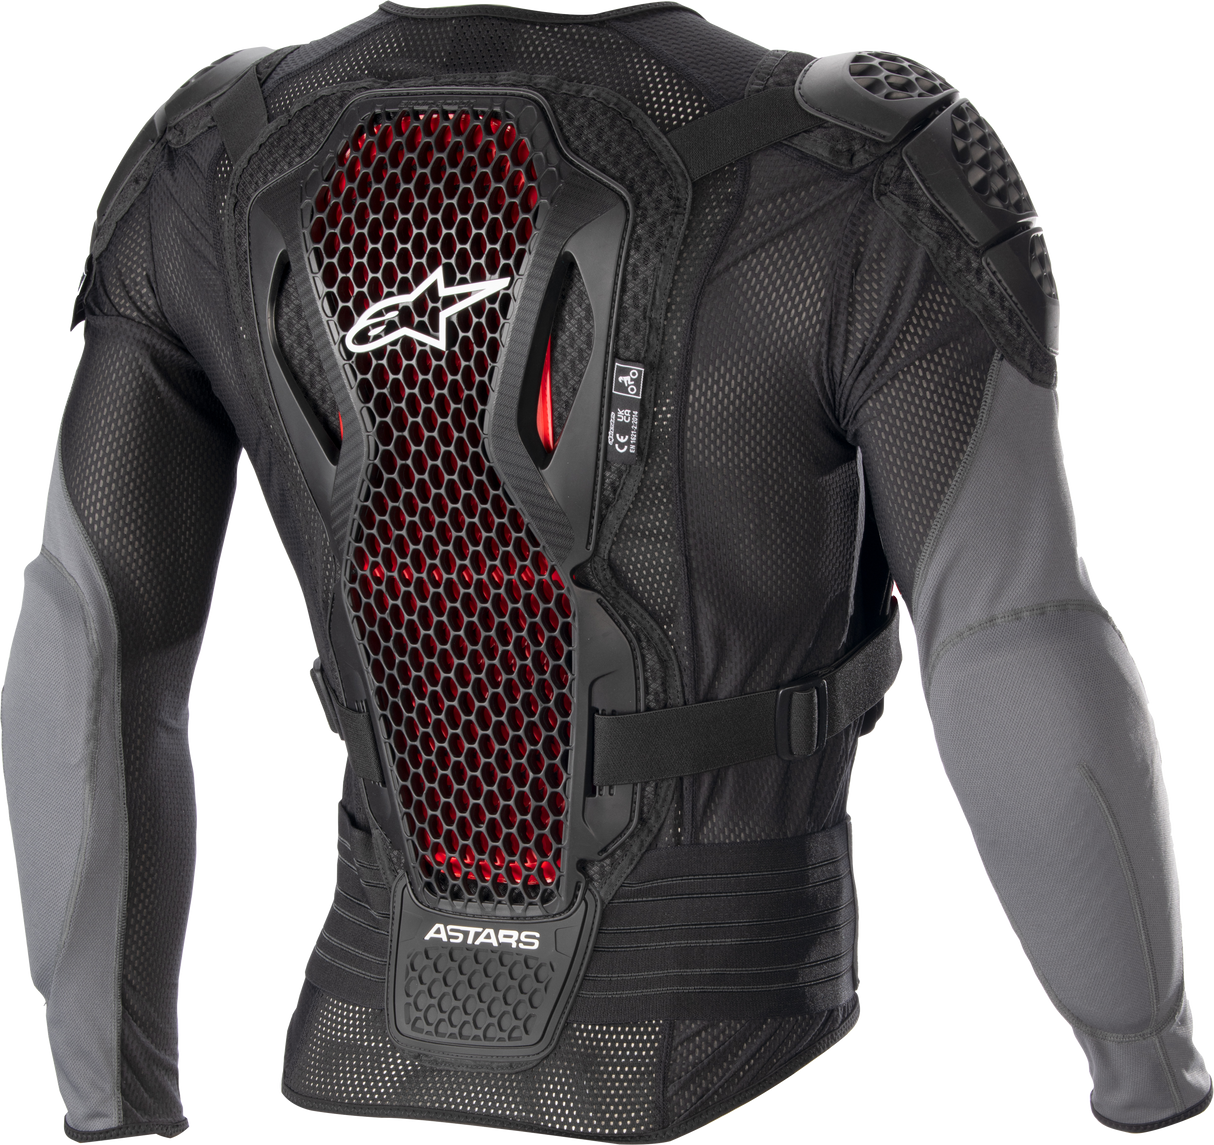 Bionic Plus V2 Protection Jacket Black/Anthracite/Red 2x